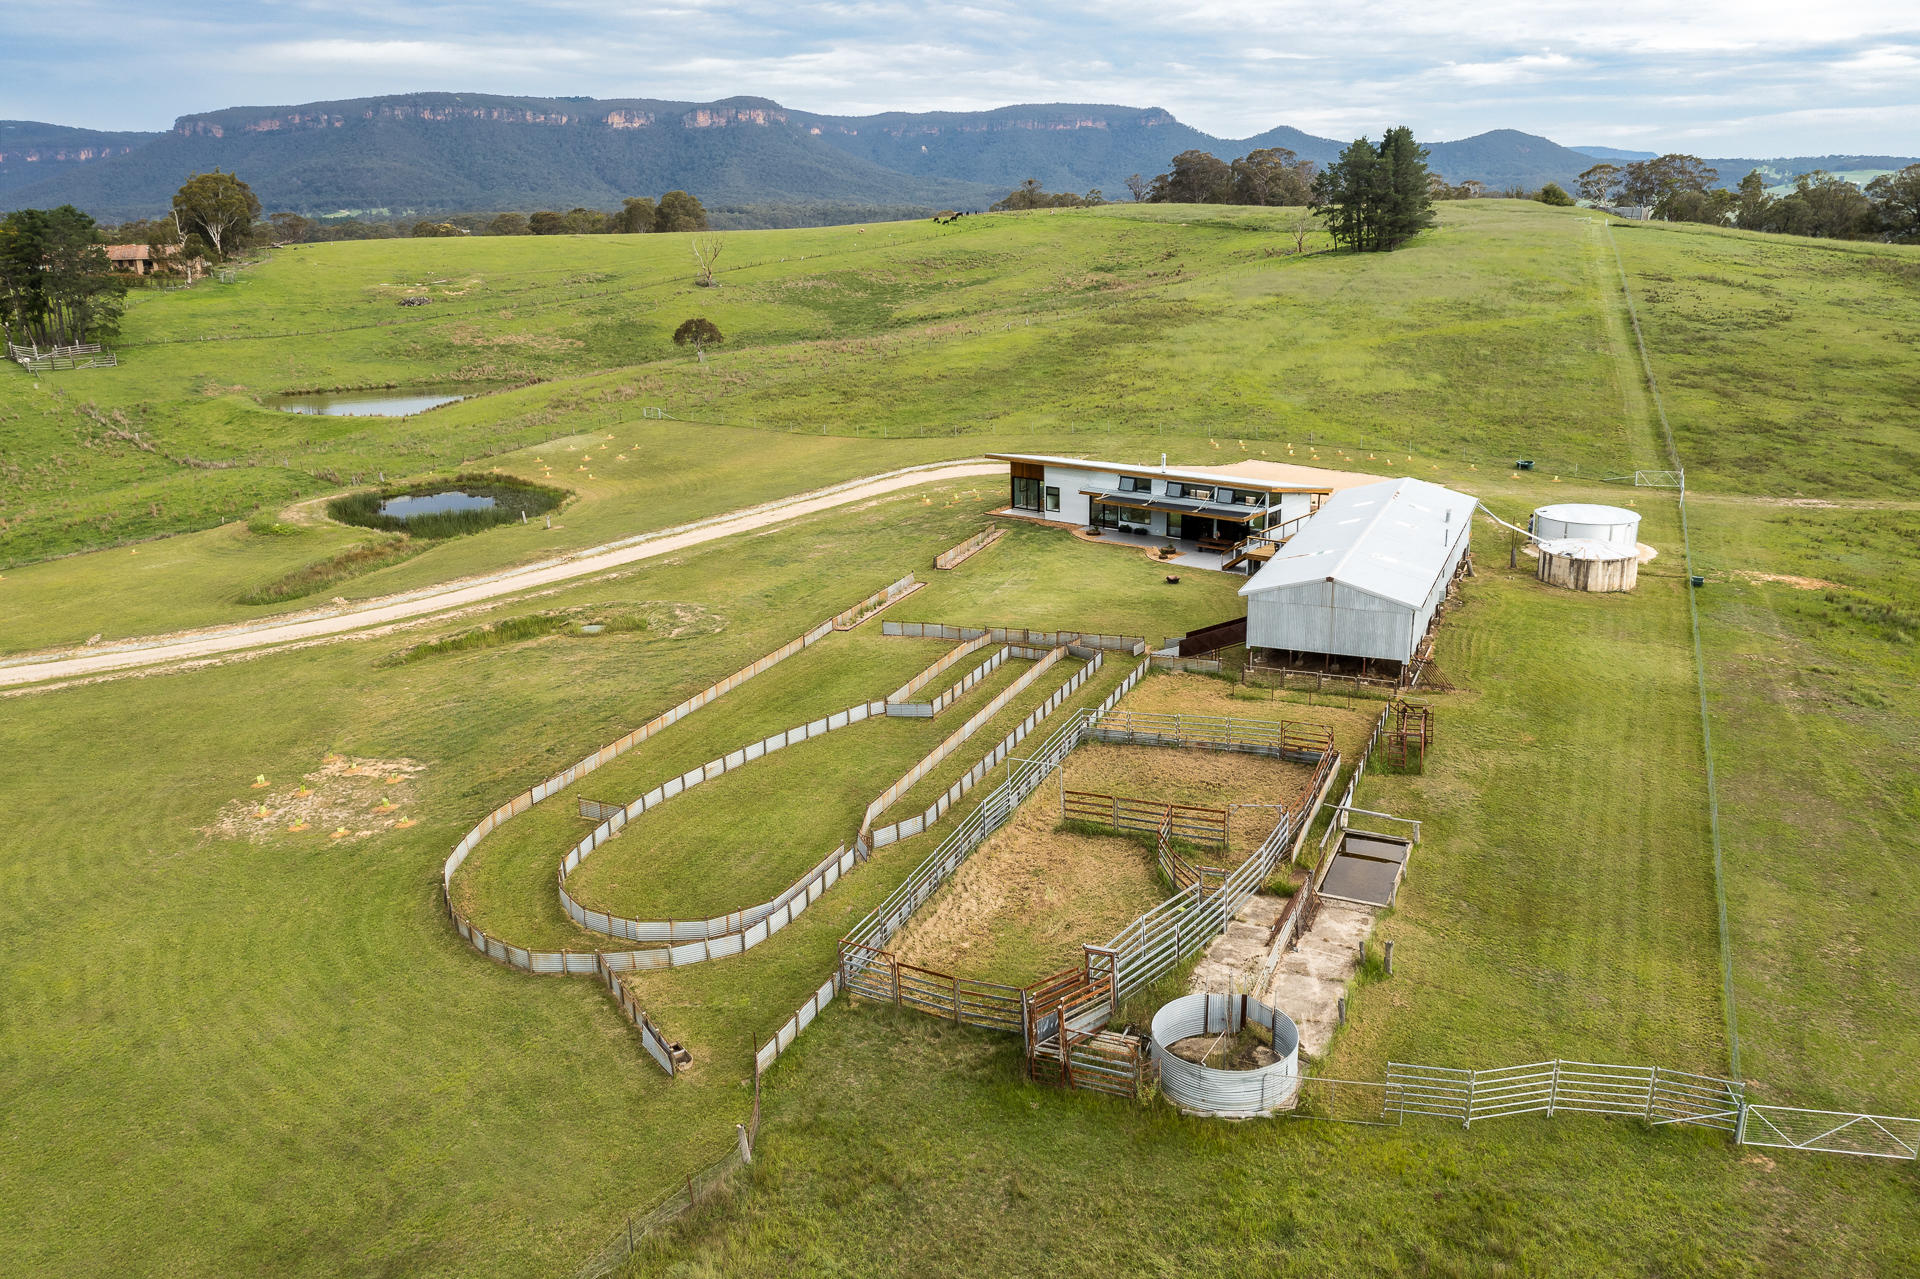 The Overflow accomodation and the restored original shearing shed located in Kanimbla Valley